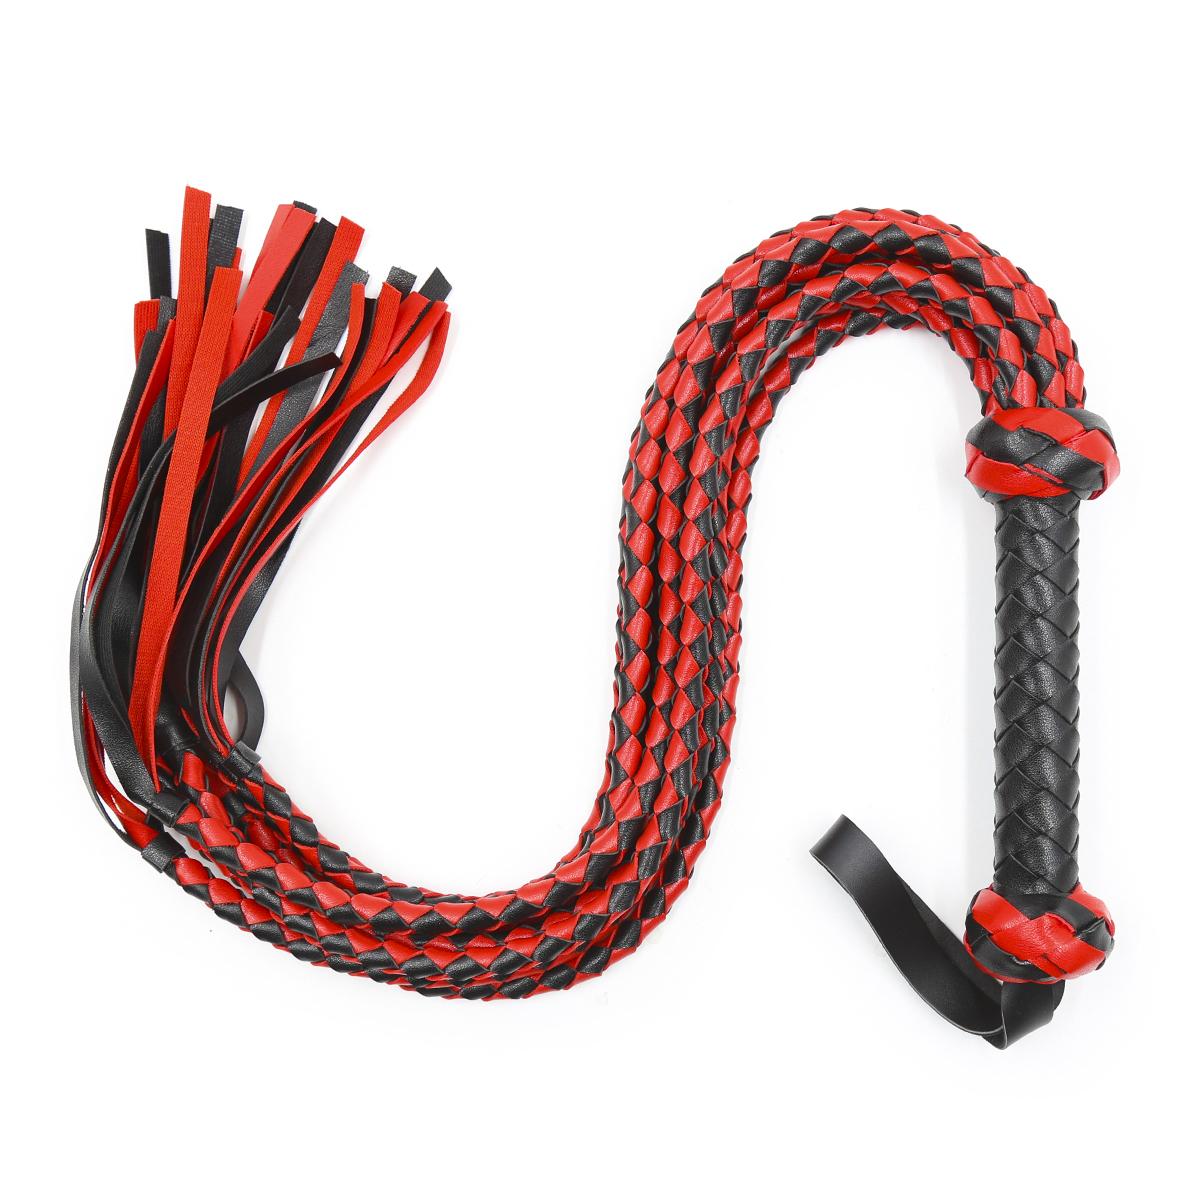 Weaving Pu Leather Whip Multiple Black And Red Braided Rope Sm Bondage Flogger